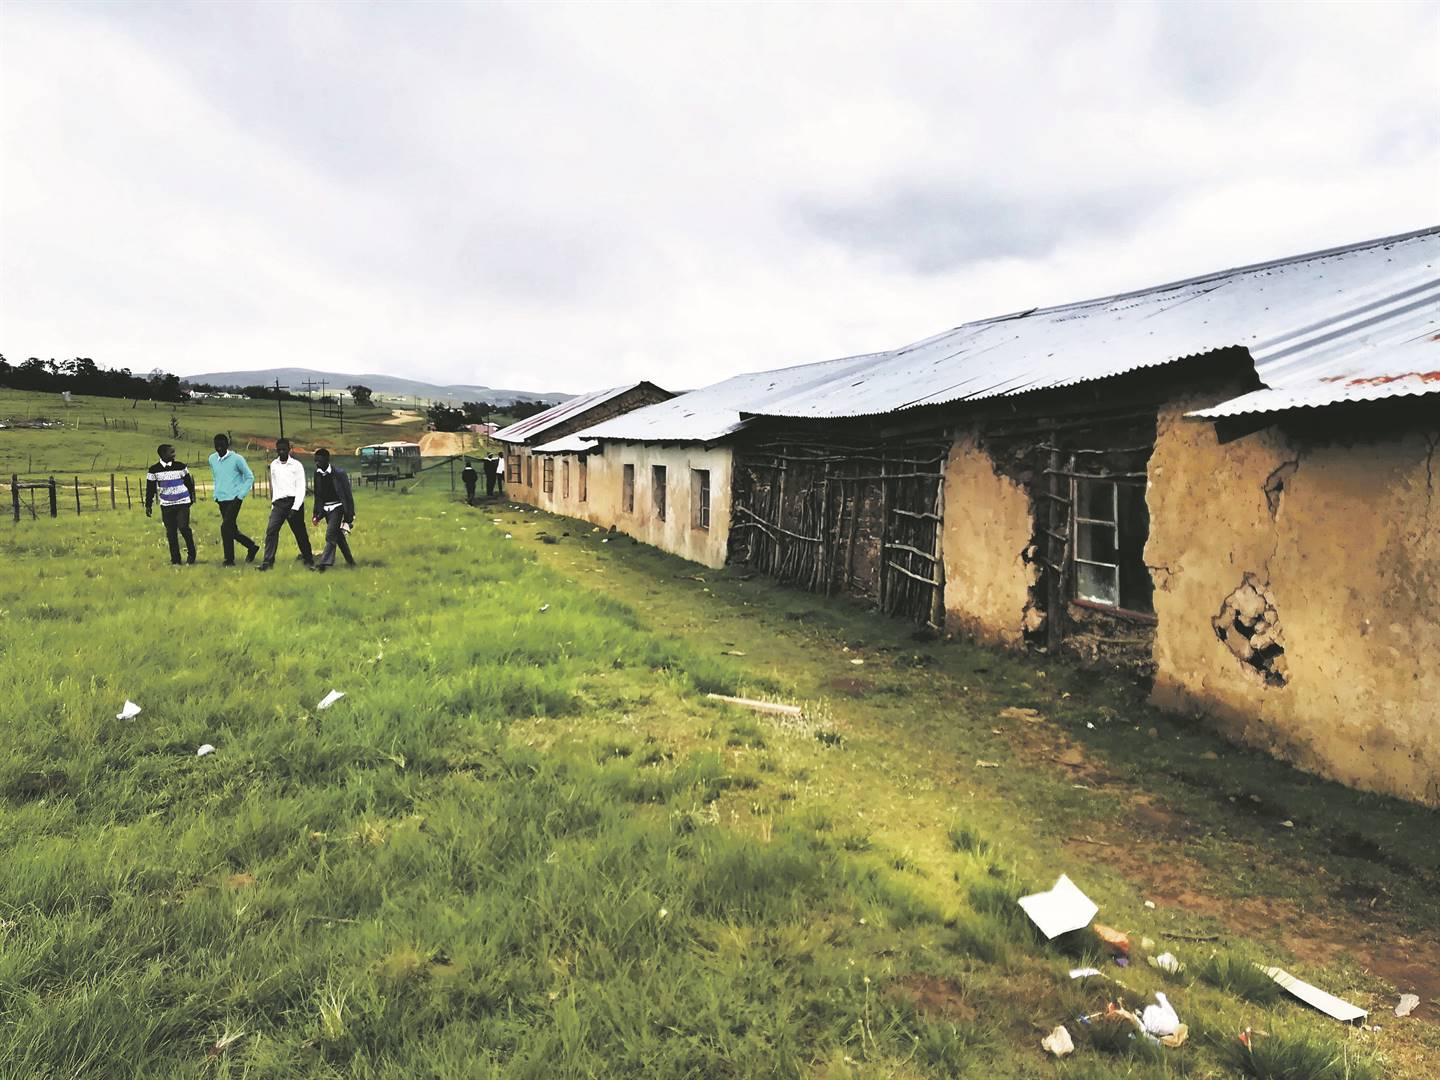 According to a new agreement, teachers in schools like this one in the Eastern Cape will be offered extra support. Picture: Lubabalo Ngcukana